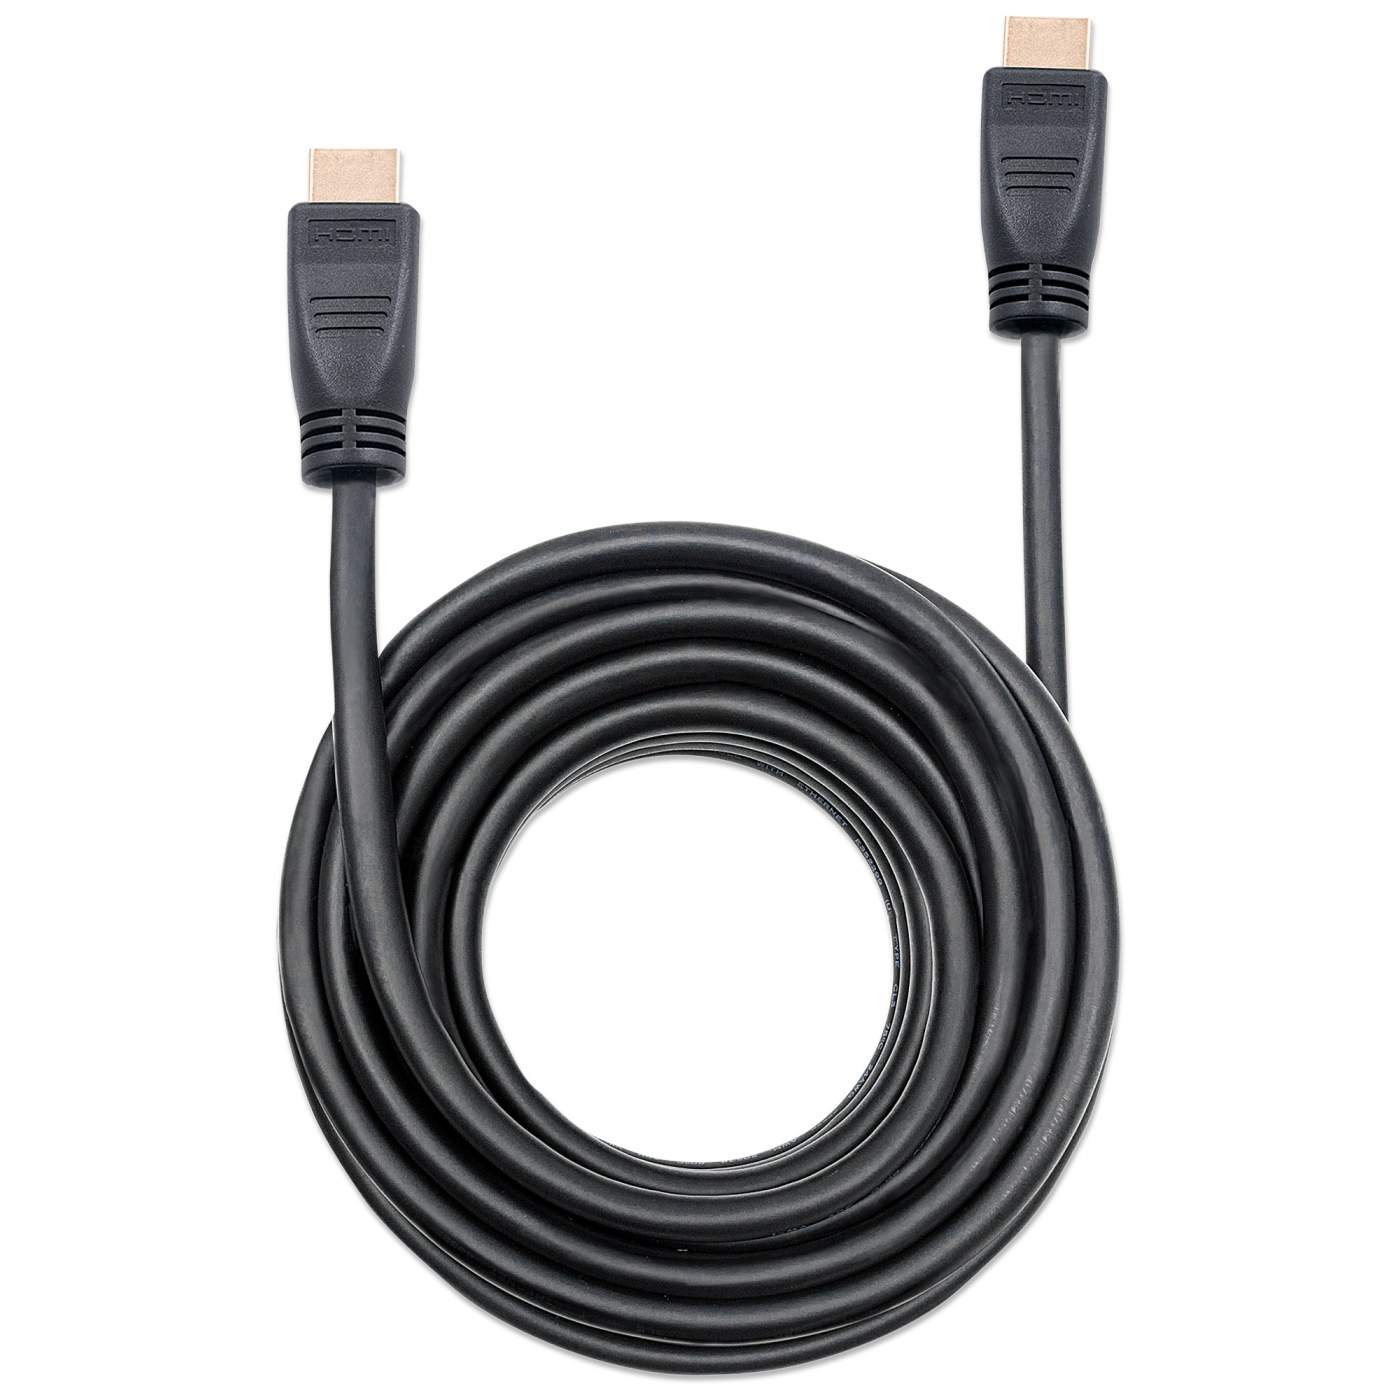 In-wall CL3 High Speed HDMI Cable with Ethernet Image 6